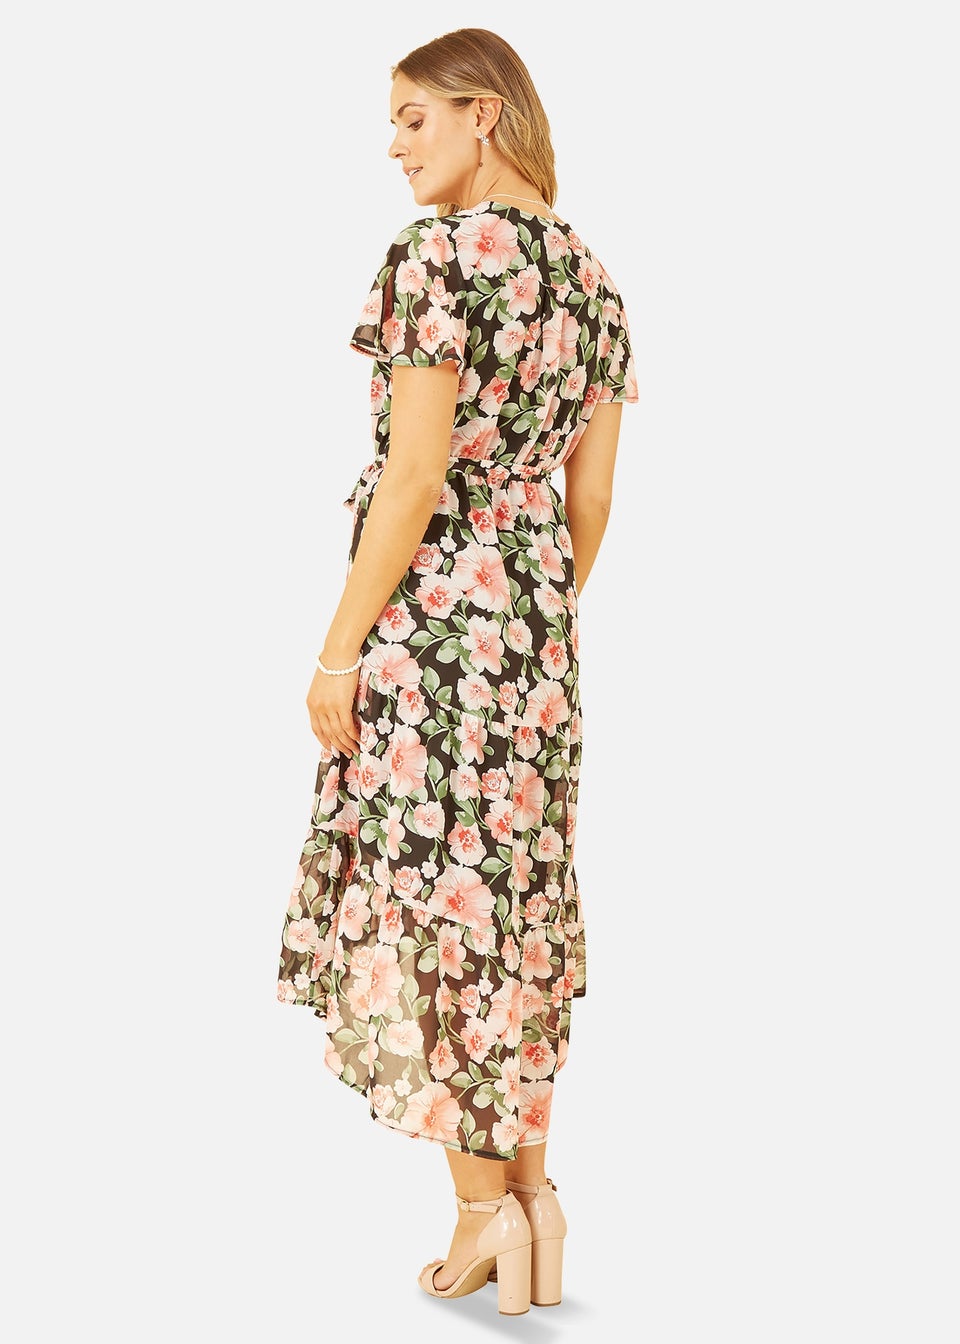 Mela Black Floral Wrap Dress With Tiered Dipped Hem